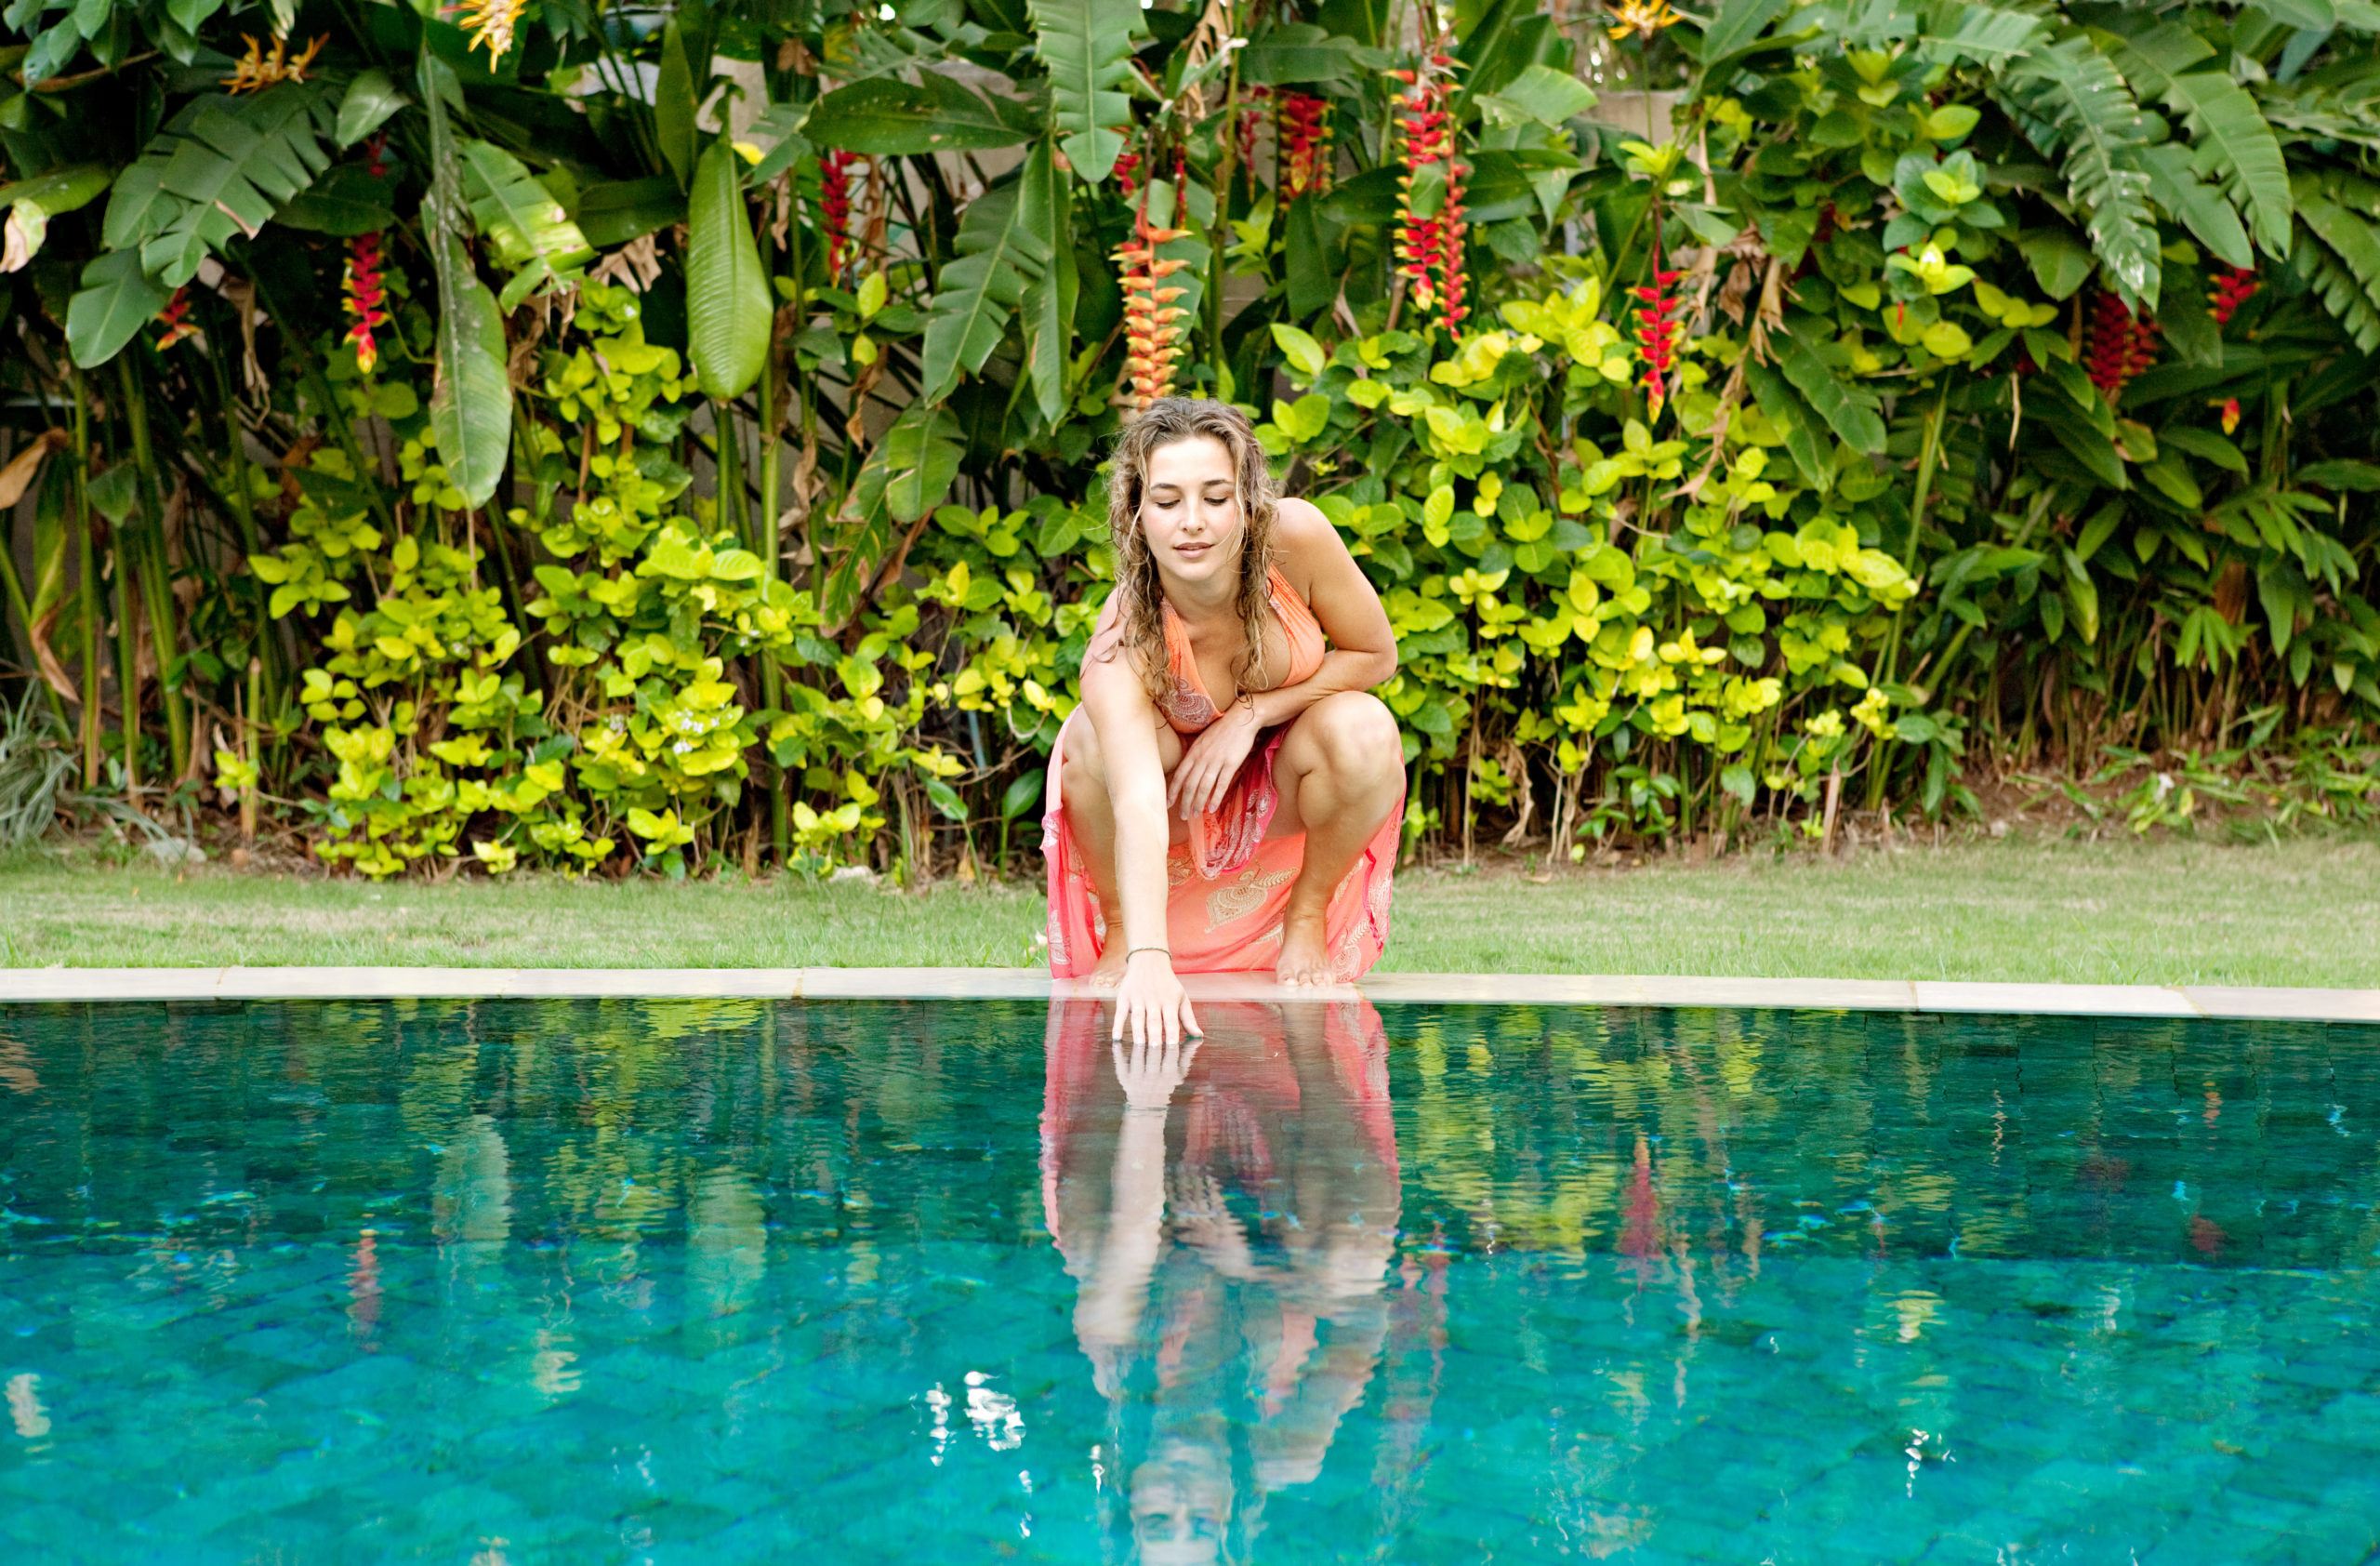 A woman reaches her hand into the pool water, surrounded by a backdrop of beautiful lush plants and foliage, enjoying a serene and nature-inspired moment by the pool.